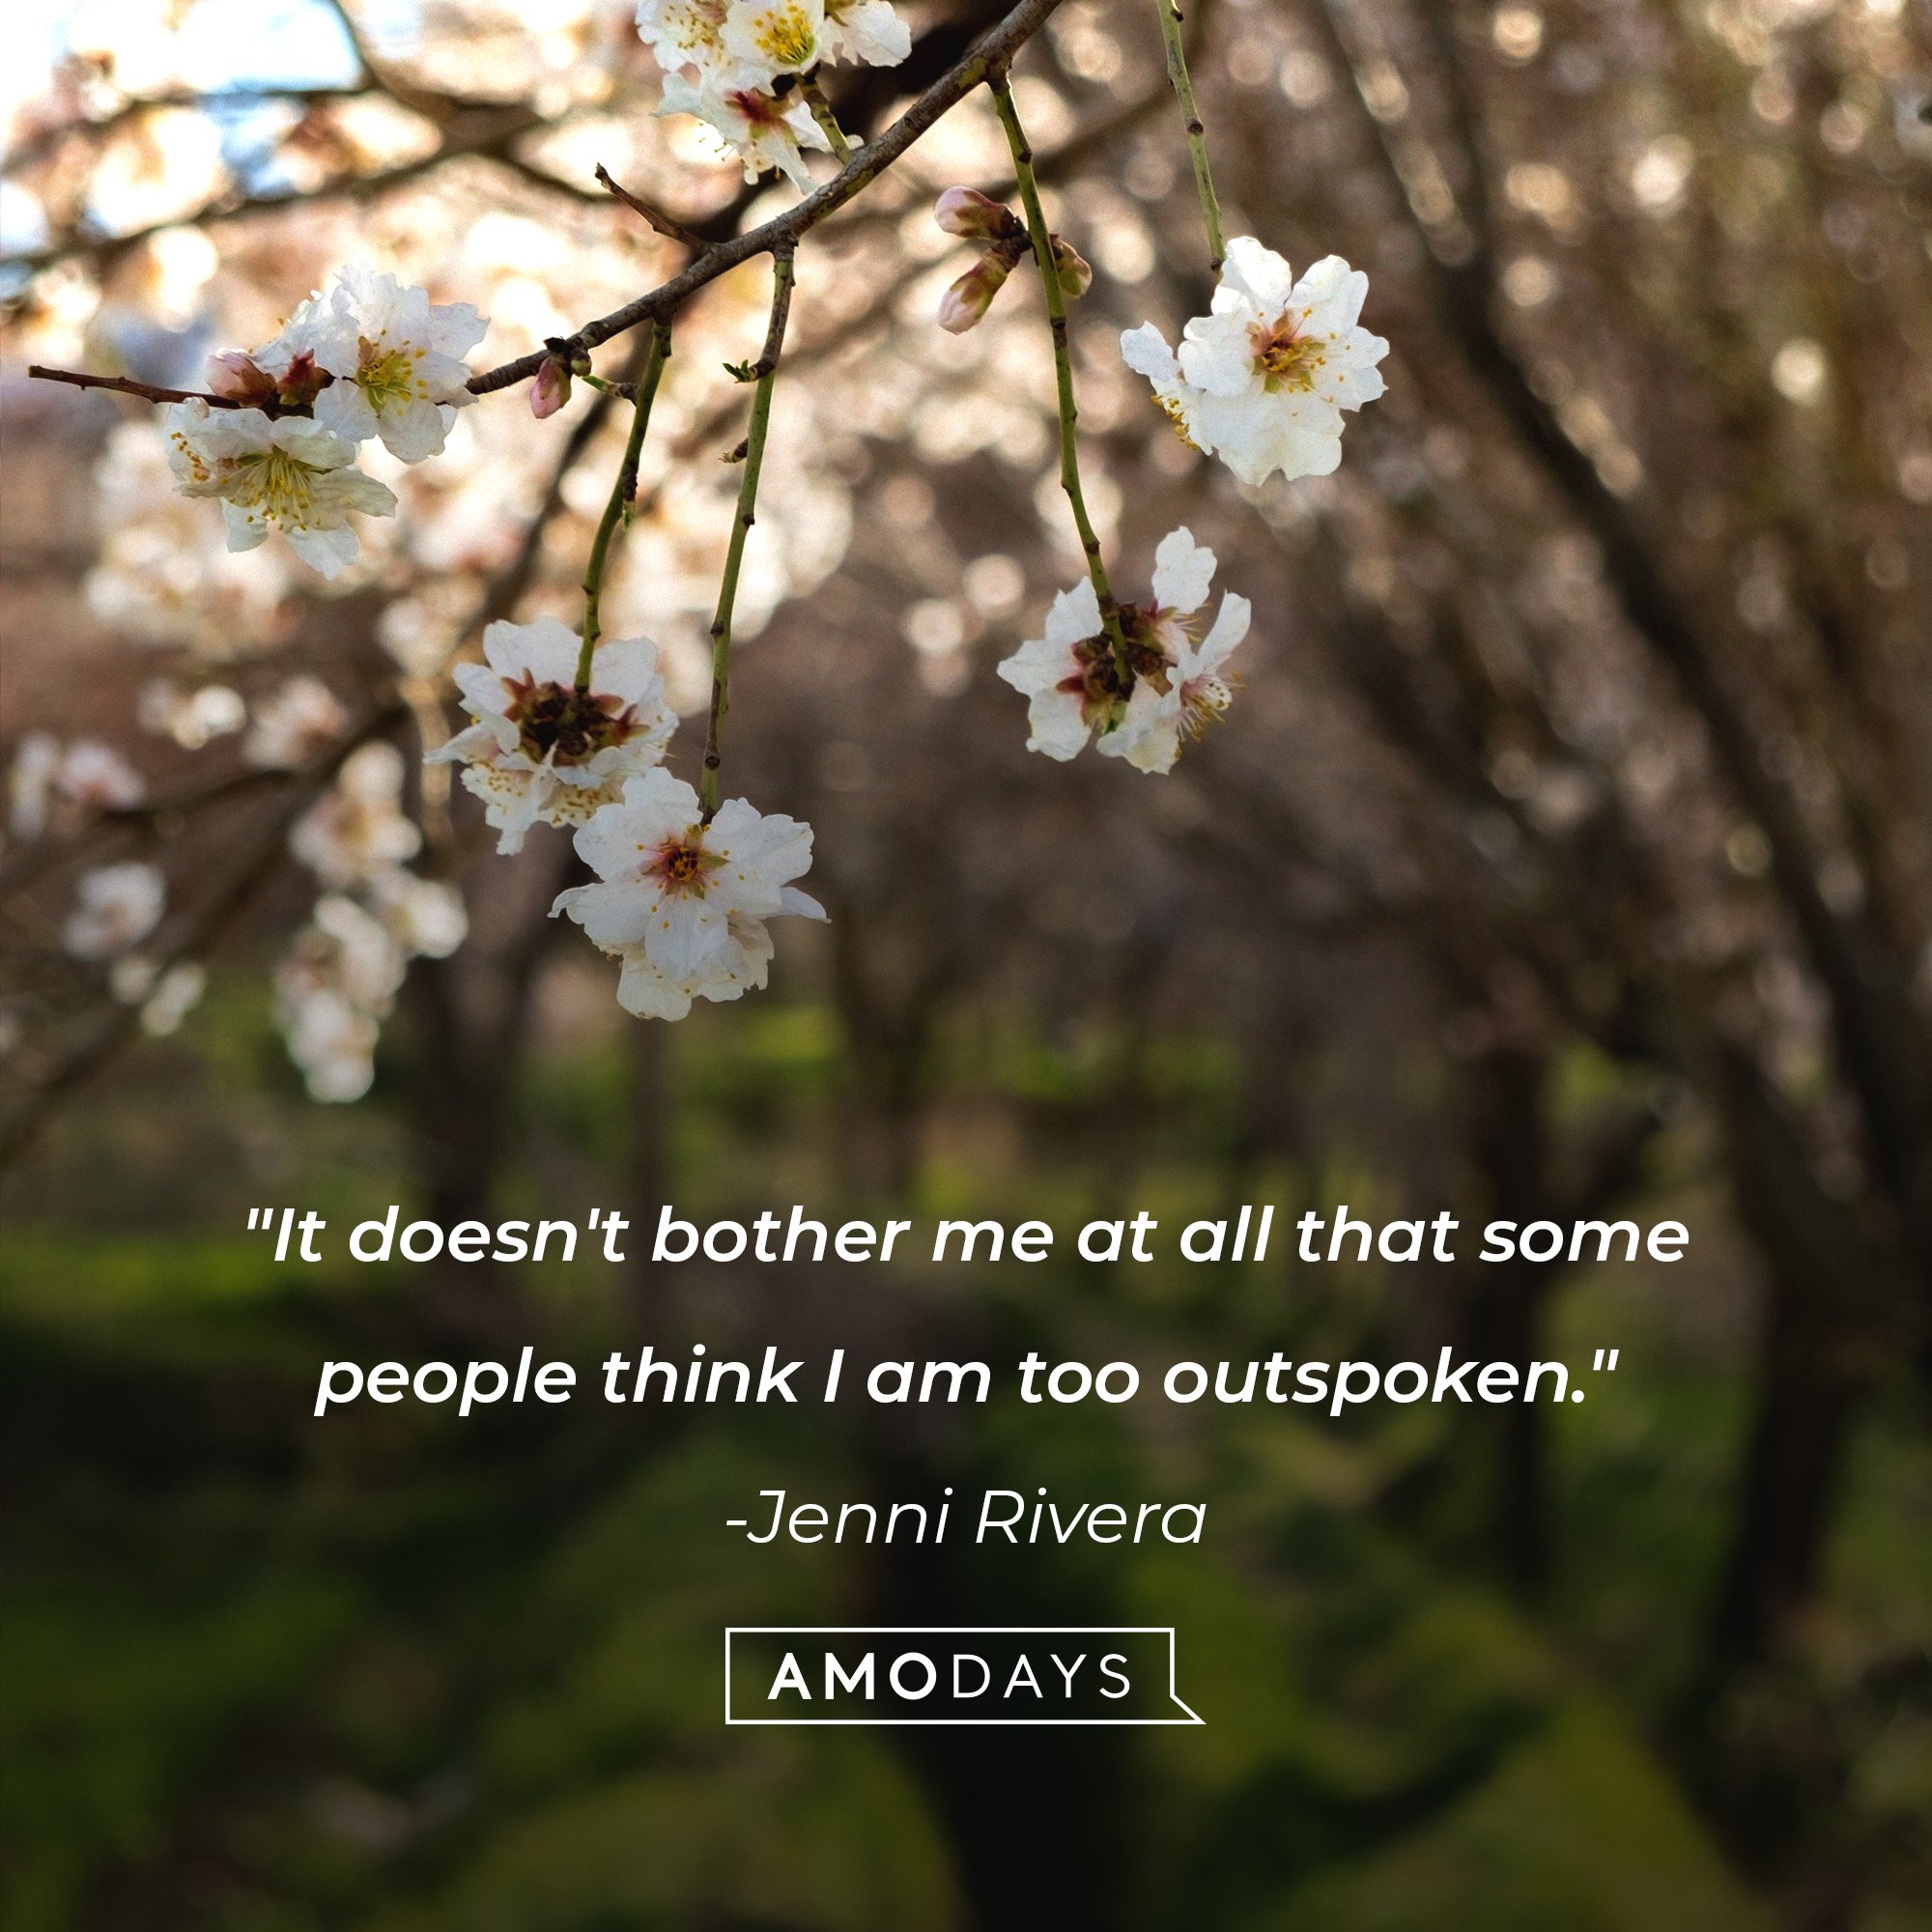 Jenni Rivera’s quote: "It doesn't bother me at all that some people think I am too outspoken." | Image: AmoDays